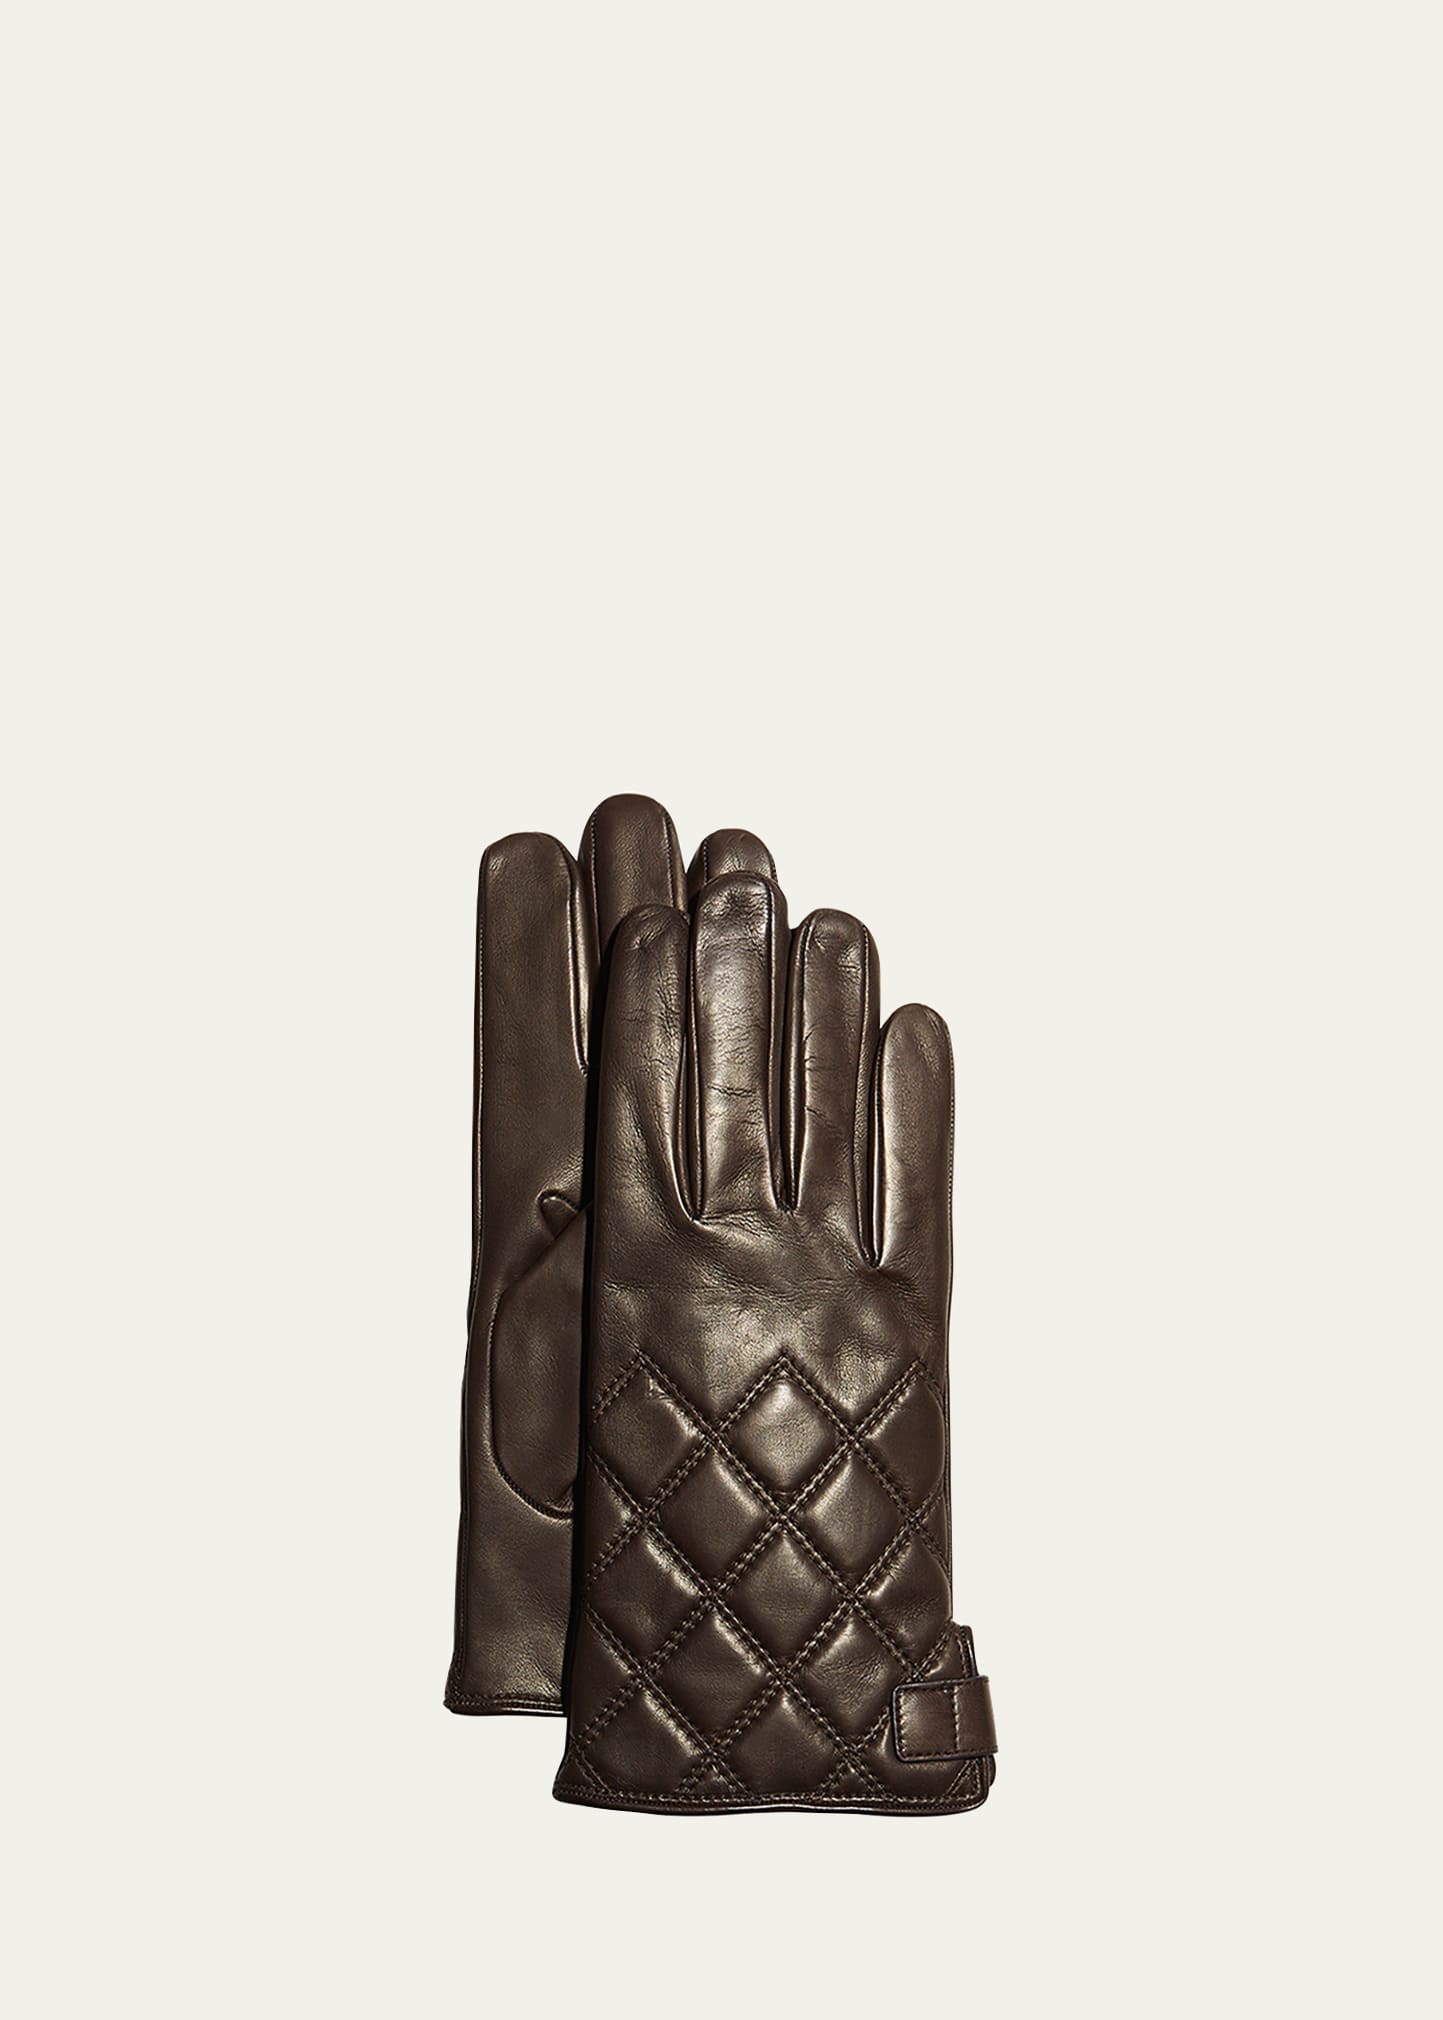 Guanti Giglio Fiorentino Men's Quilted Napa Snap Gloves With Cashmere Lining In 12 Brown